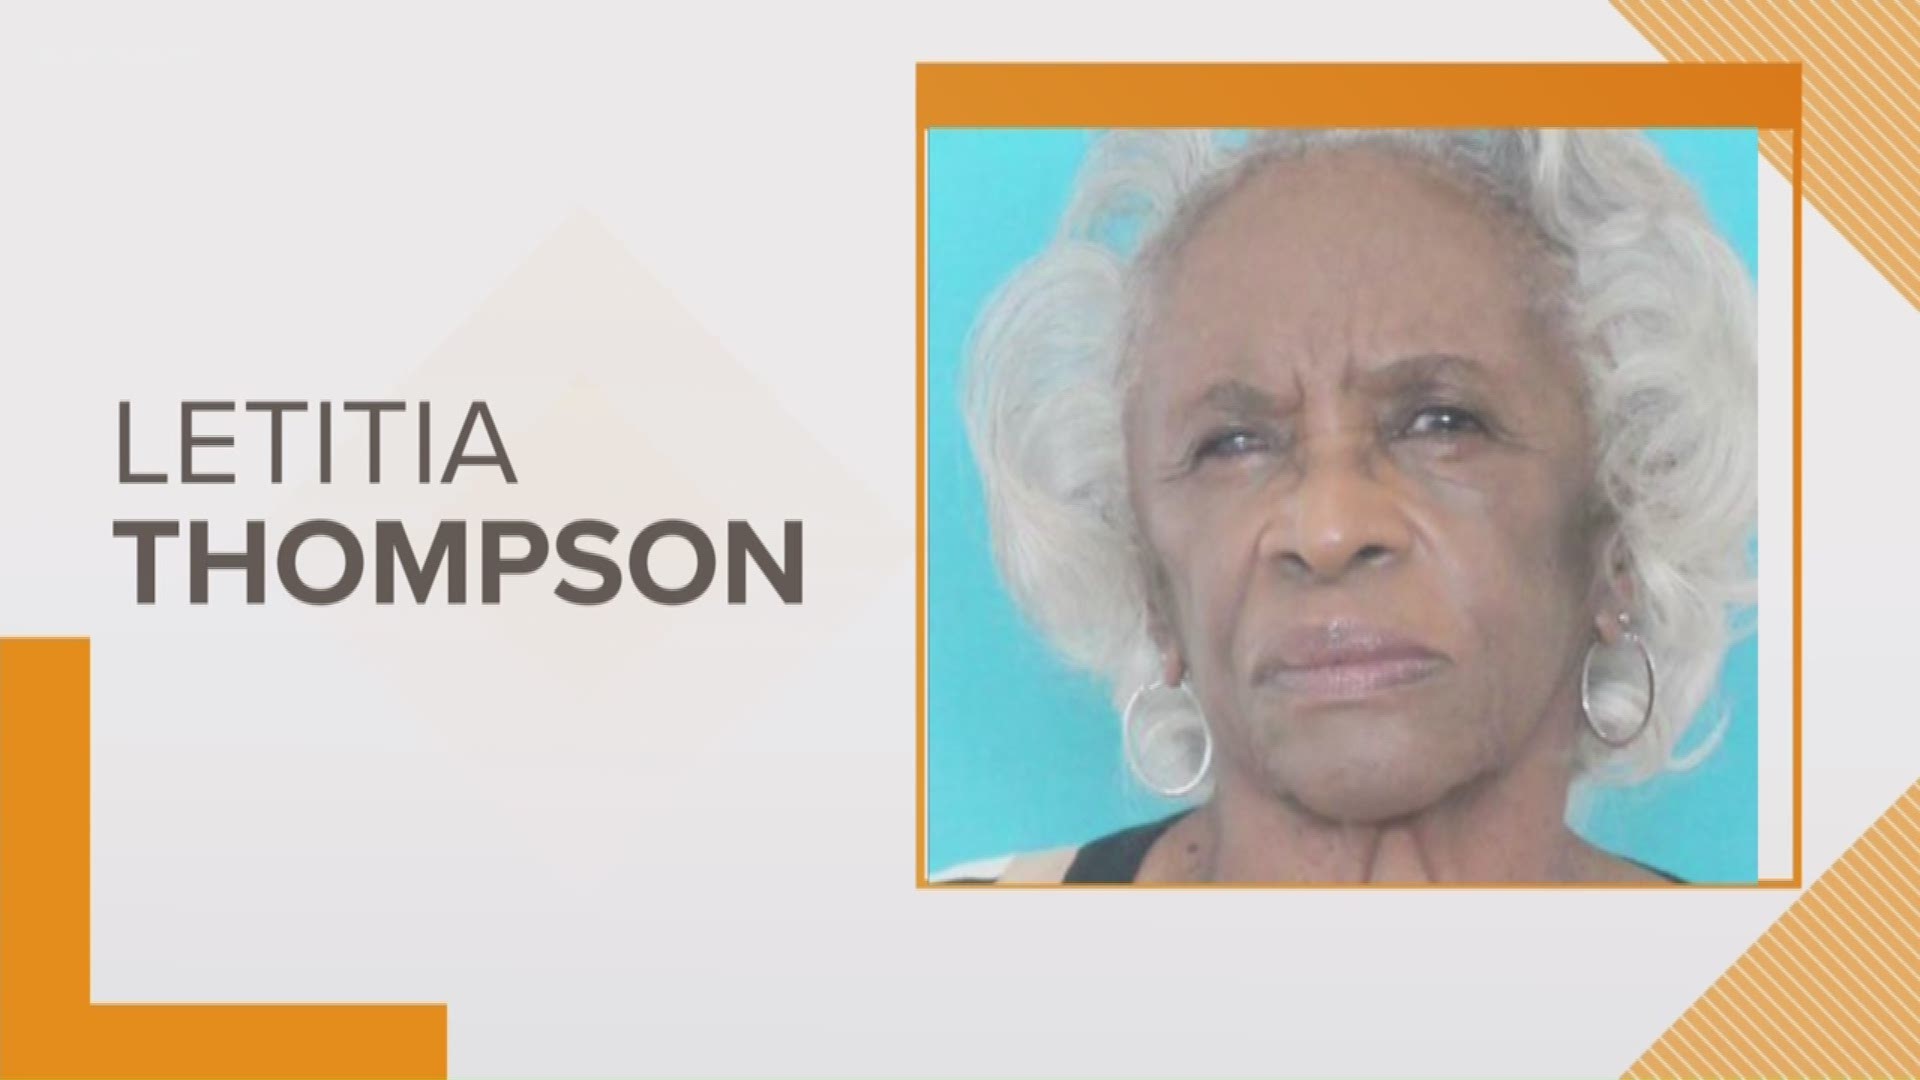 Police are asking for the public's help to find Letitia Thompson, who was last seen at church Saturday morning in the 7300 block of Crowder Blvd.